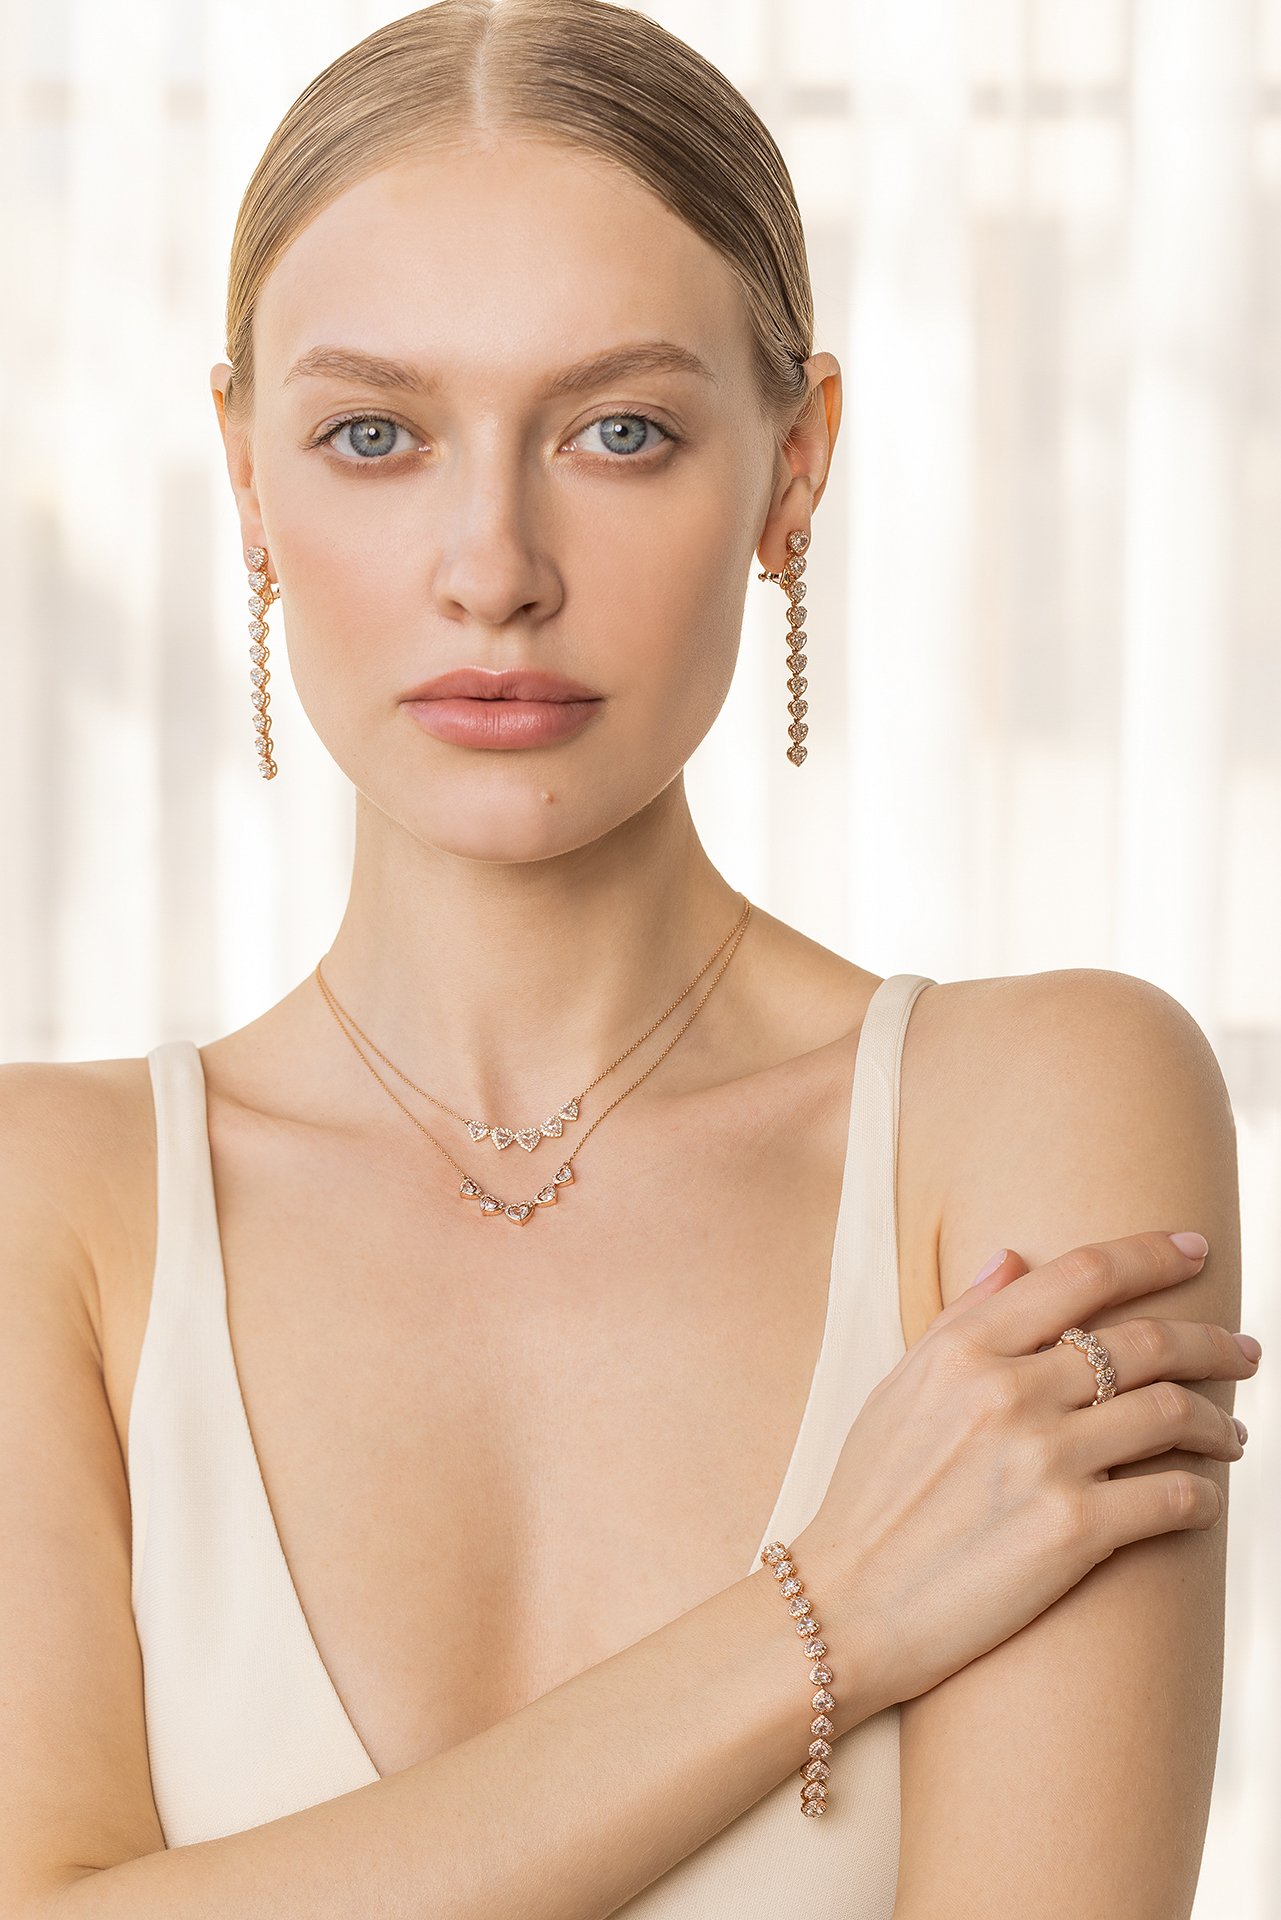 64 Facets Jewelry Campaign